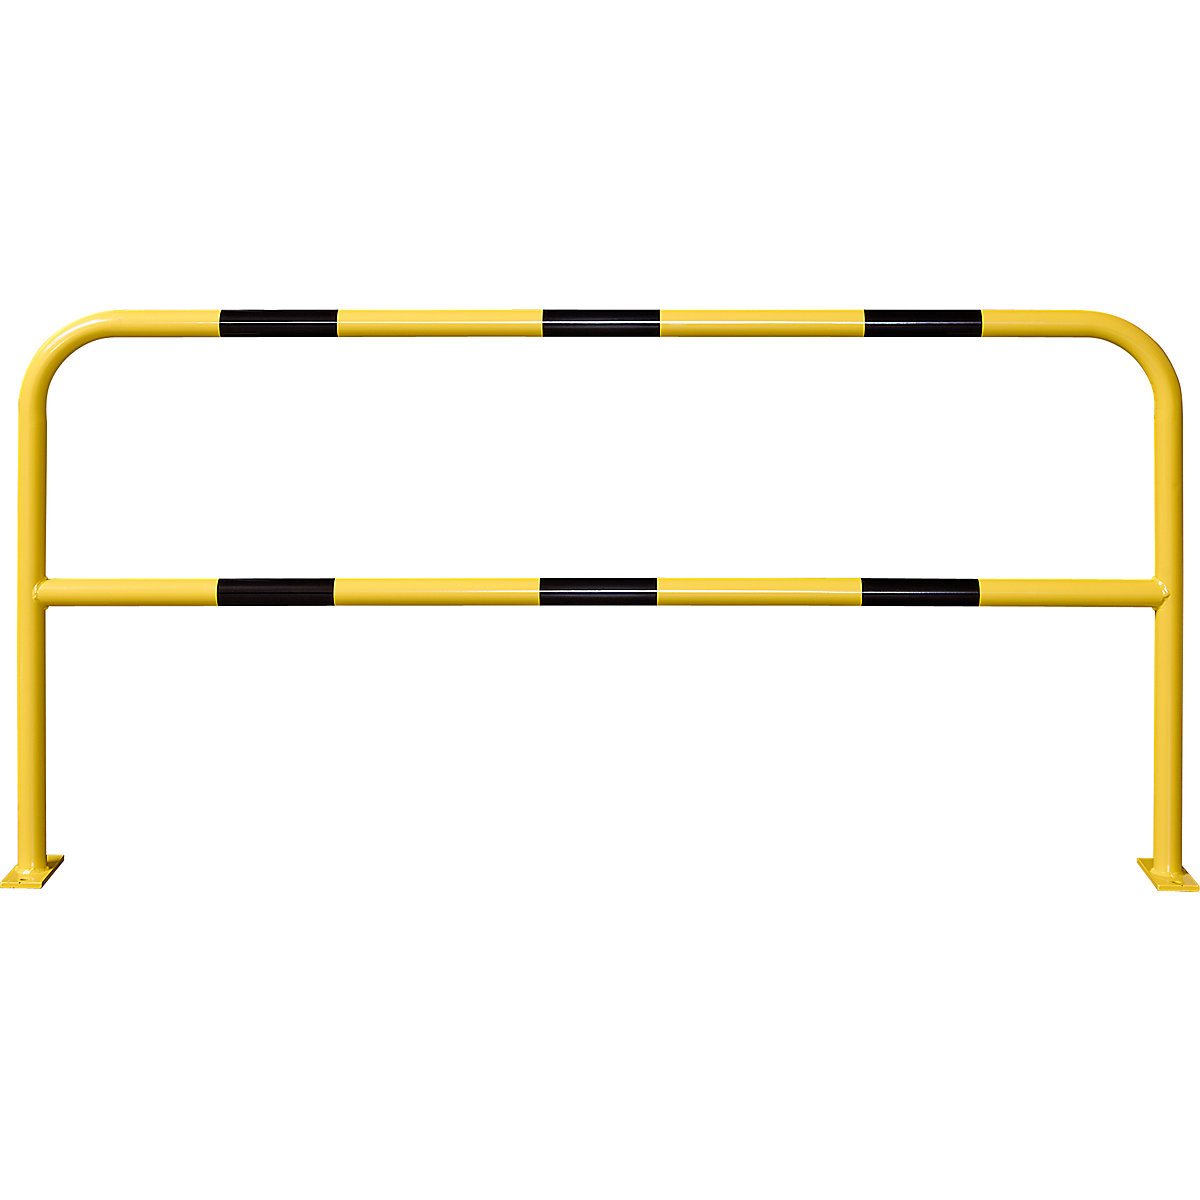 Crash protection bar, round tubing 48/2 mm, for bolting in place, width 2000 mm, plastic coated-6